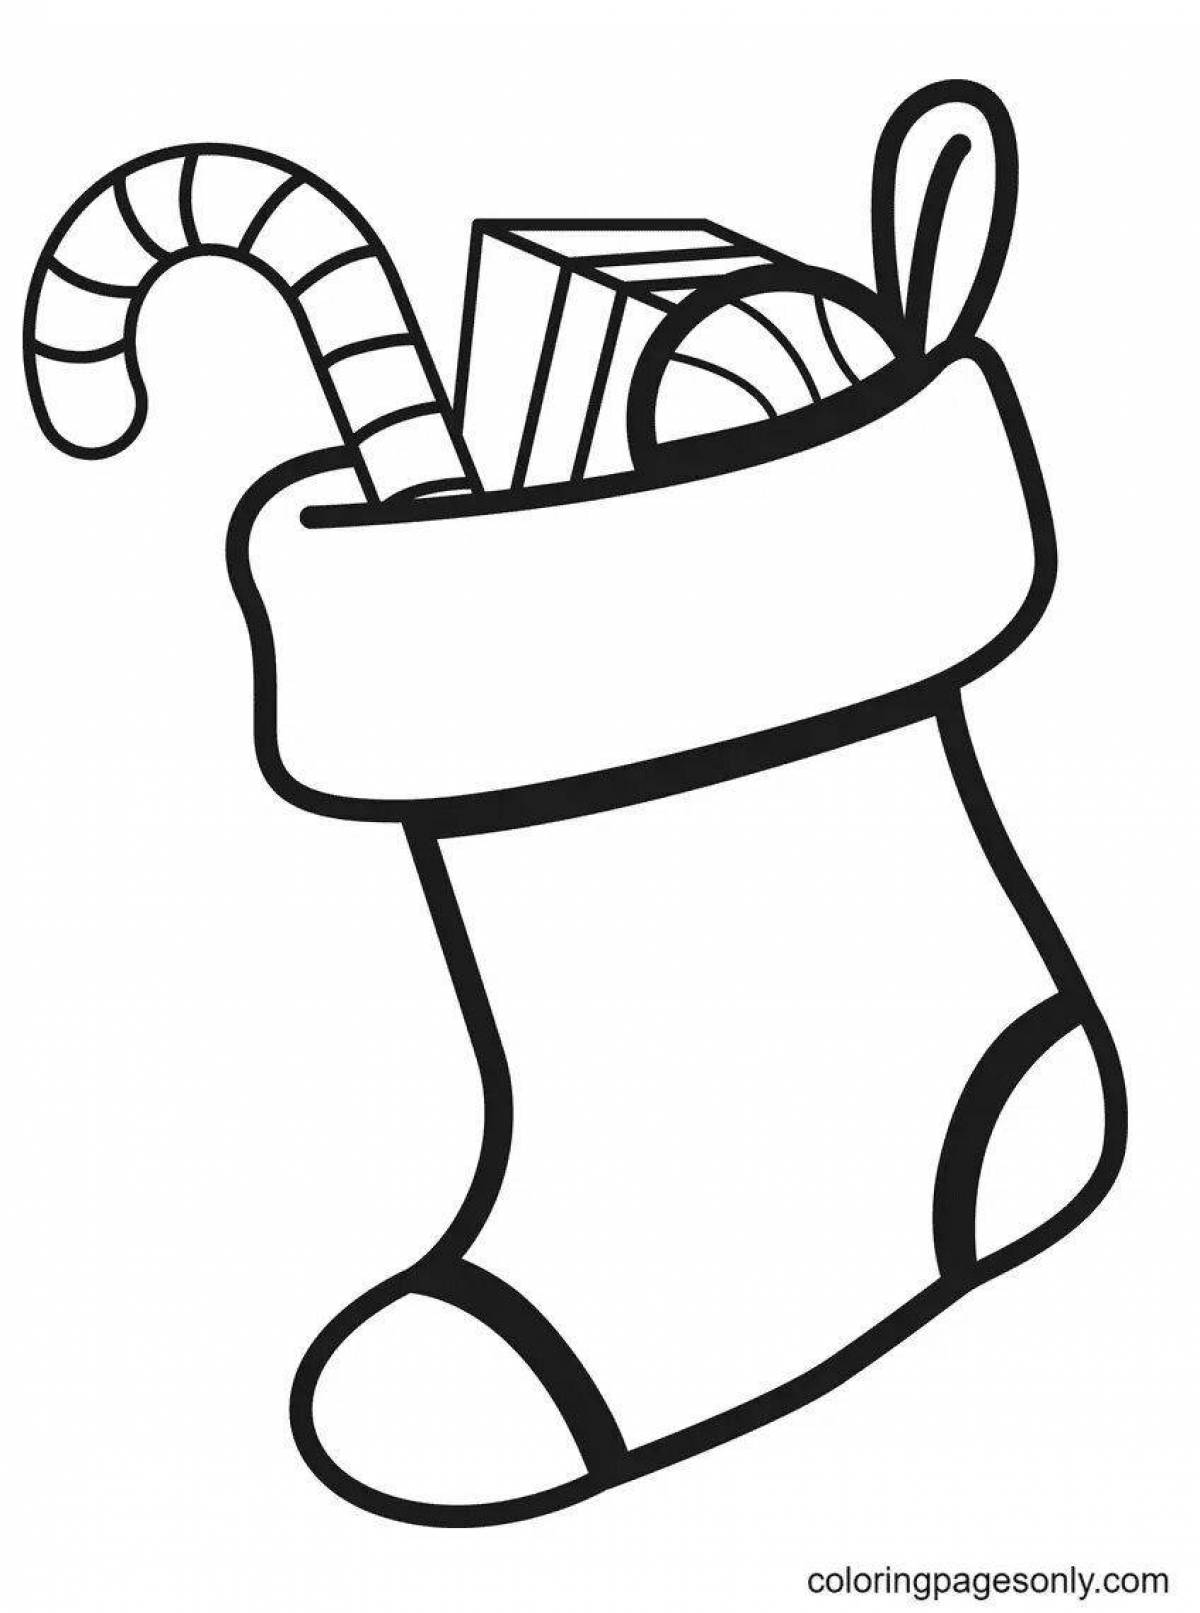 Glittering Christmas sock coloring page